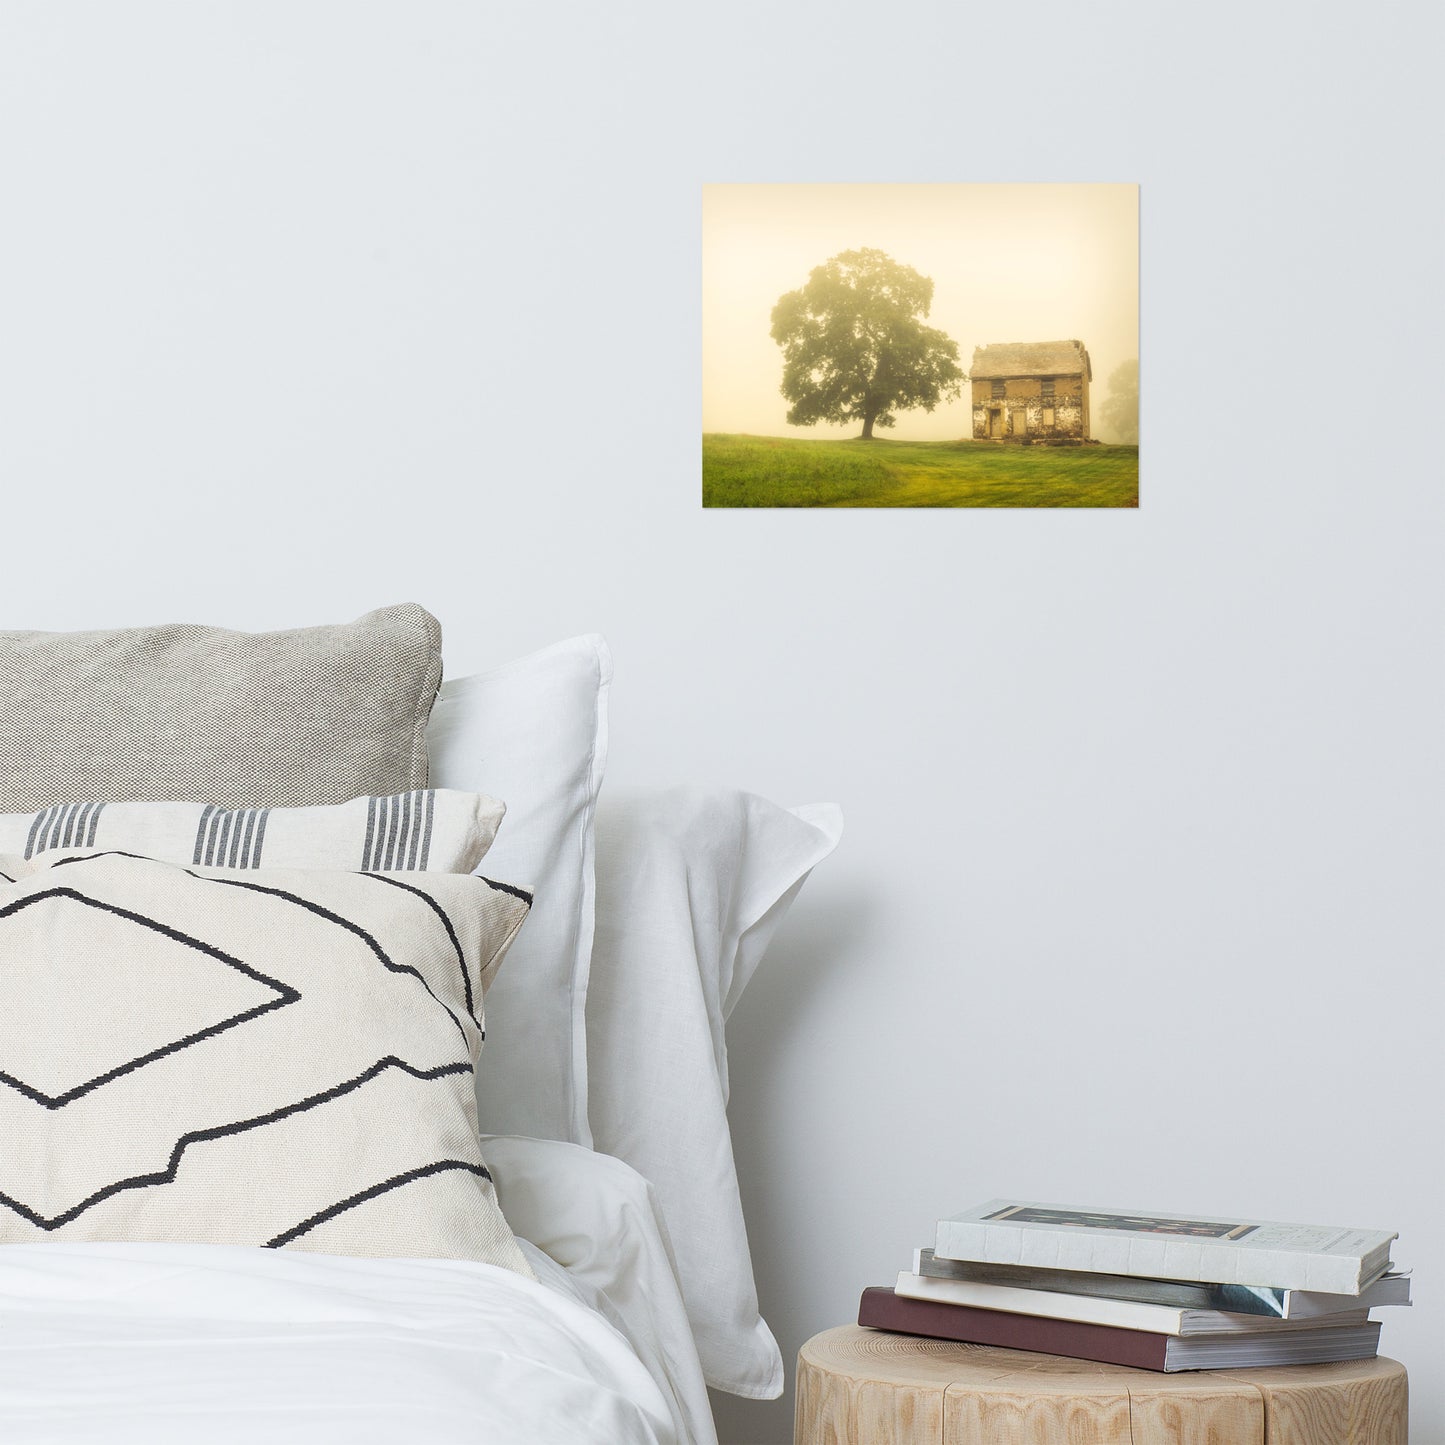 Bedroom Farmhouse Wall Art: Old Farmhouse in Foggy Meadow Rustic - Rural / Country Style Landscape / Nature Photograph Loose / Unframed / Frameless / Frameable Wall Art Print - Artwork